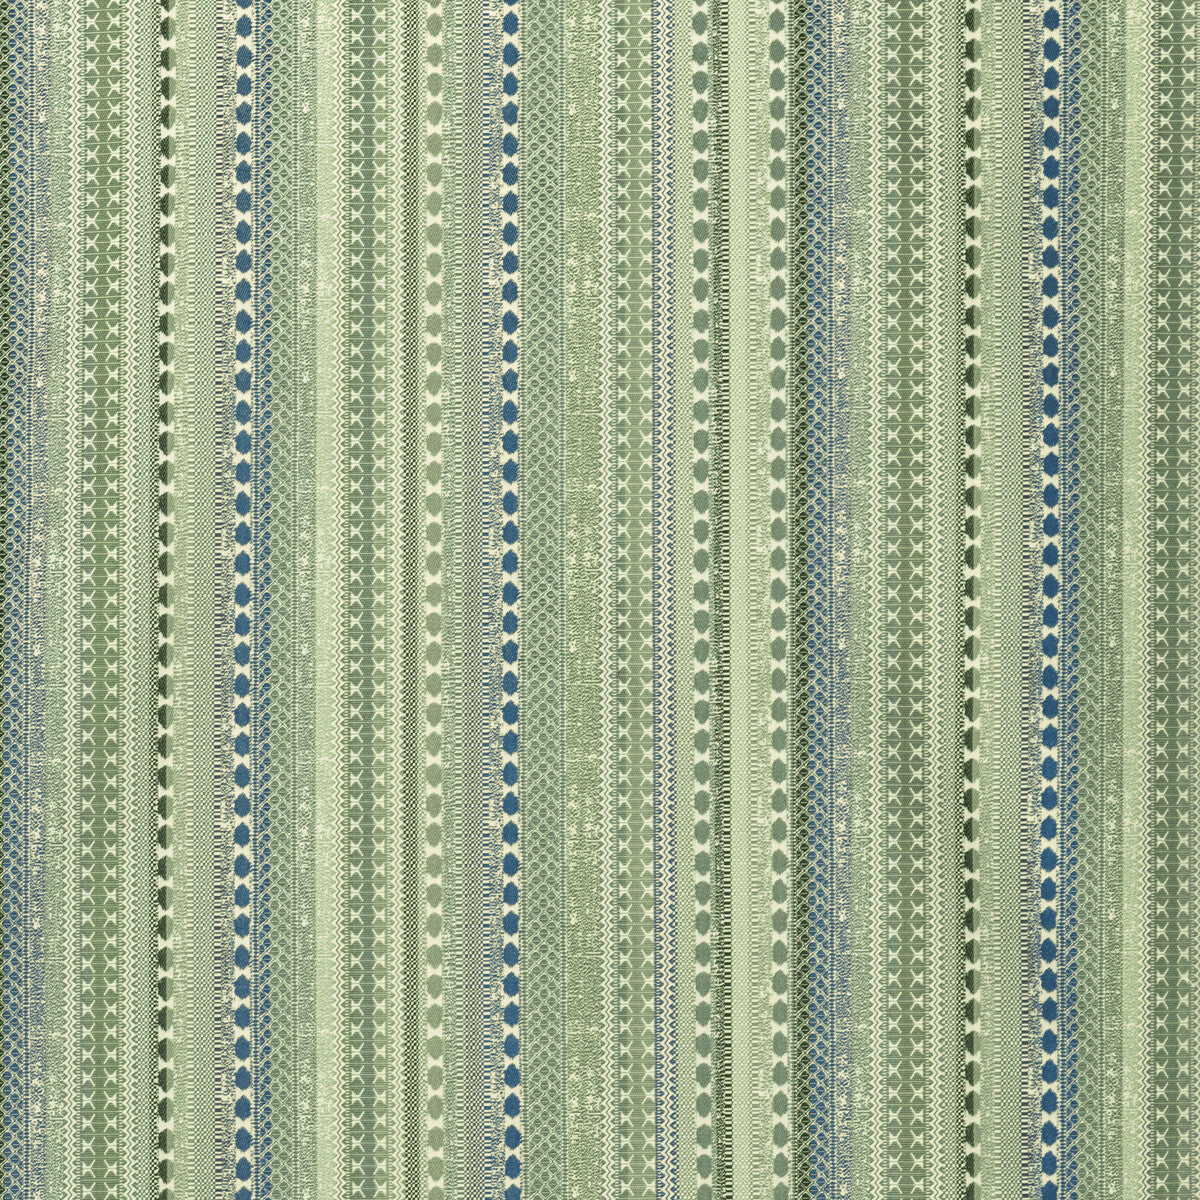 Palmete Weave fabric in aqua color - pattern 2021101.335.0 - by Lee Jofa in the Triana Weaves collection